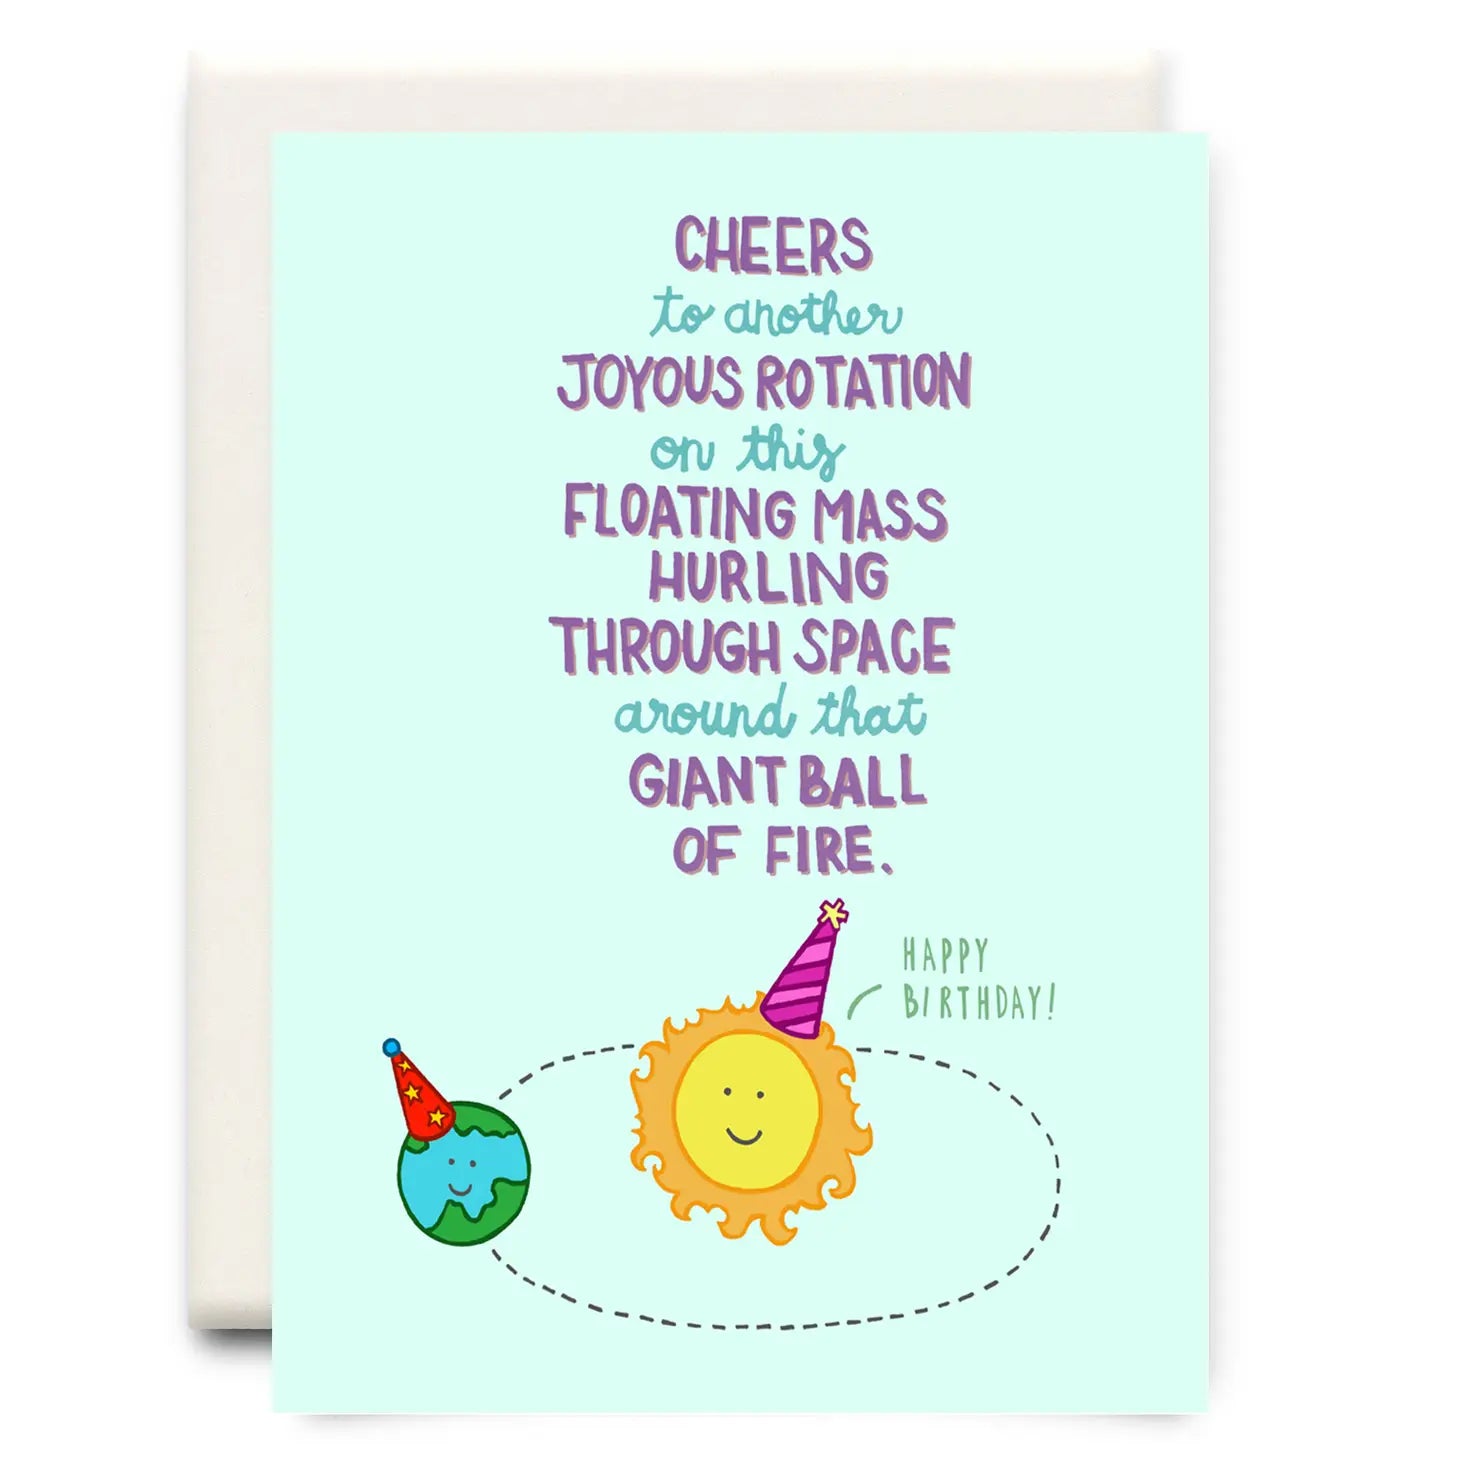 Inkwell Cards “Cheers to Another Joyous Rotation" Card